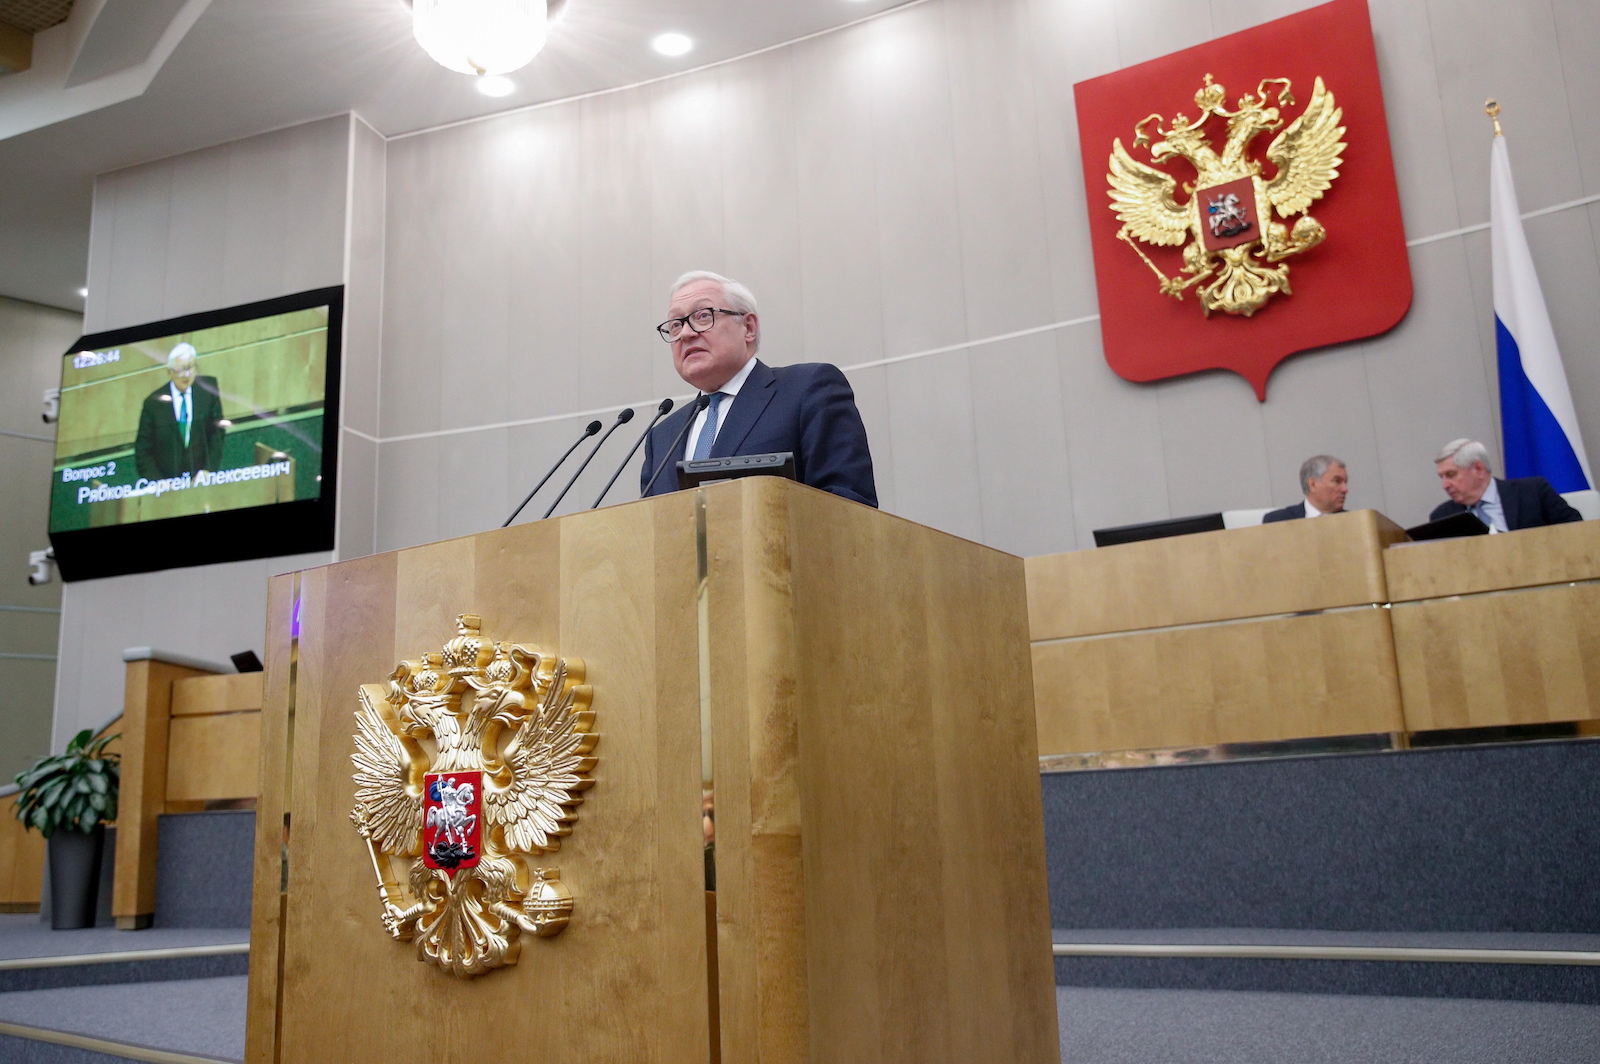 epa10631369 A handout photo made available by The State Duma Press Service, the Lower House of the Russian Parliament, shows Deputy Foreign Minister Sergey Ryabkov speaking during a session at the Russian State Duma in Moscow, Russia, 16 May 2023. The State Duma approved a bill denouncing the Treaty on Conventional Armed Forces in Europe (CFE). Russian President Putin submitted the document to the State Duma the previous week.  EPA/STATE DUMA PRESS SERVICE HANDOUT MANDATORY CREDIT / HANDOUT / EDITORIAL USE ONLY/NO SALES HANDOUT EDITORIAL USE ONLY/NO SALES